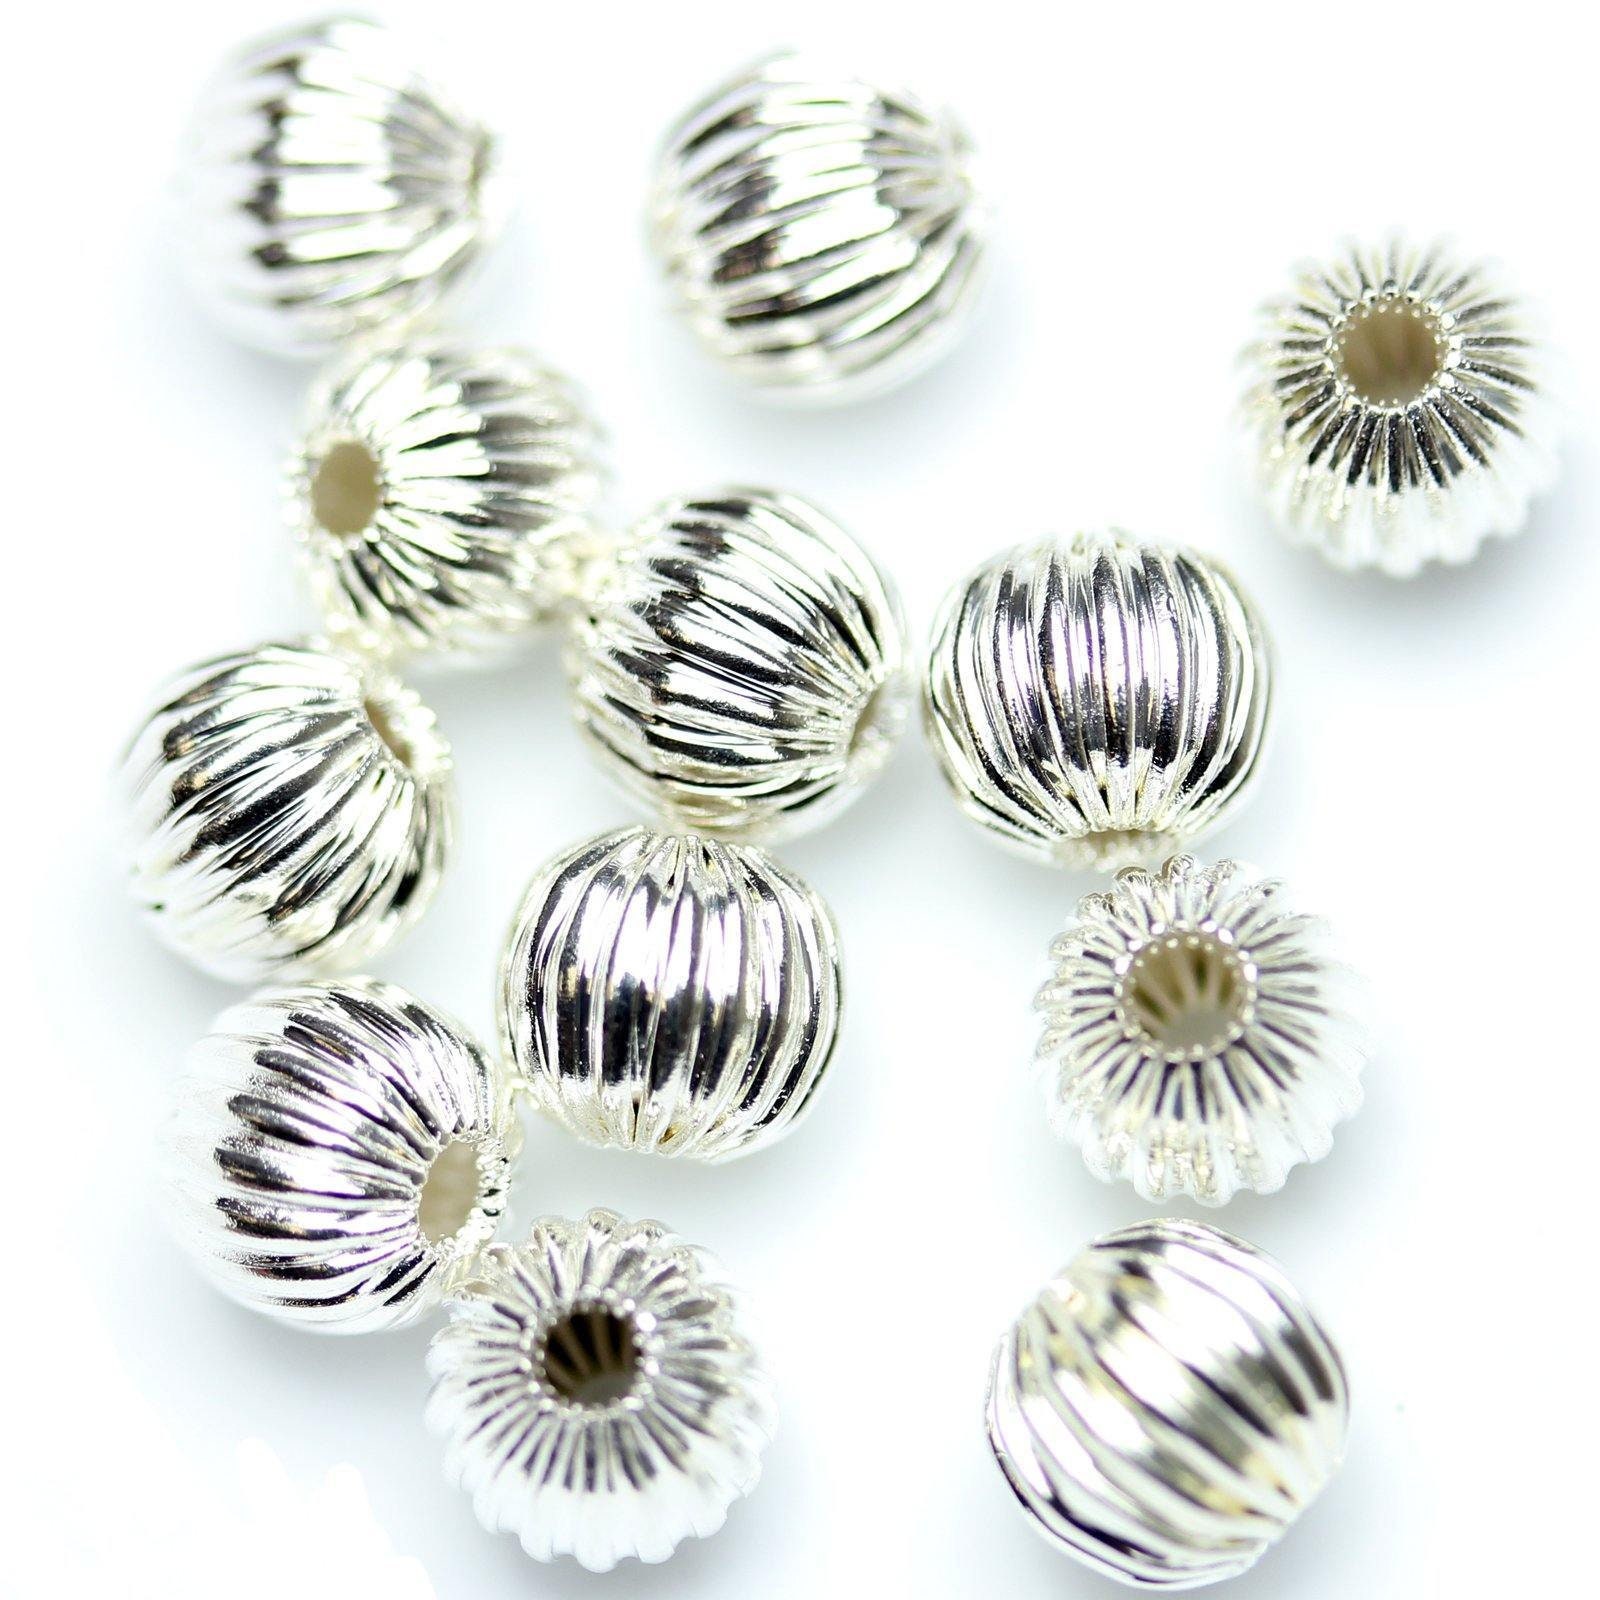 30 Antique Silver Round Ribbed Beads, Corrugated Silver Spacer